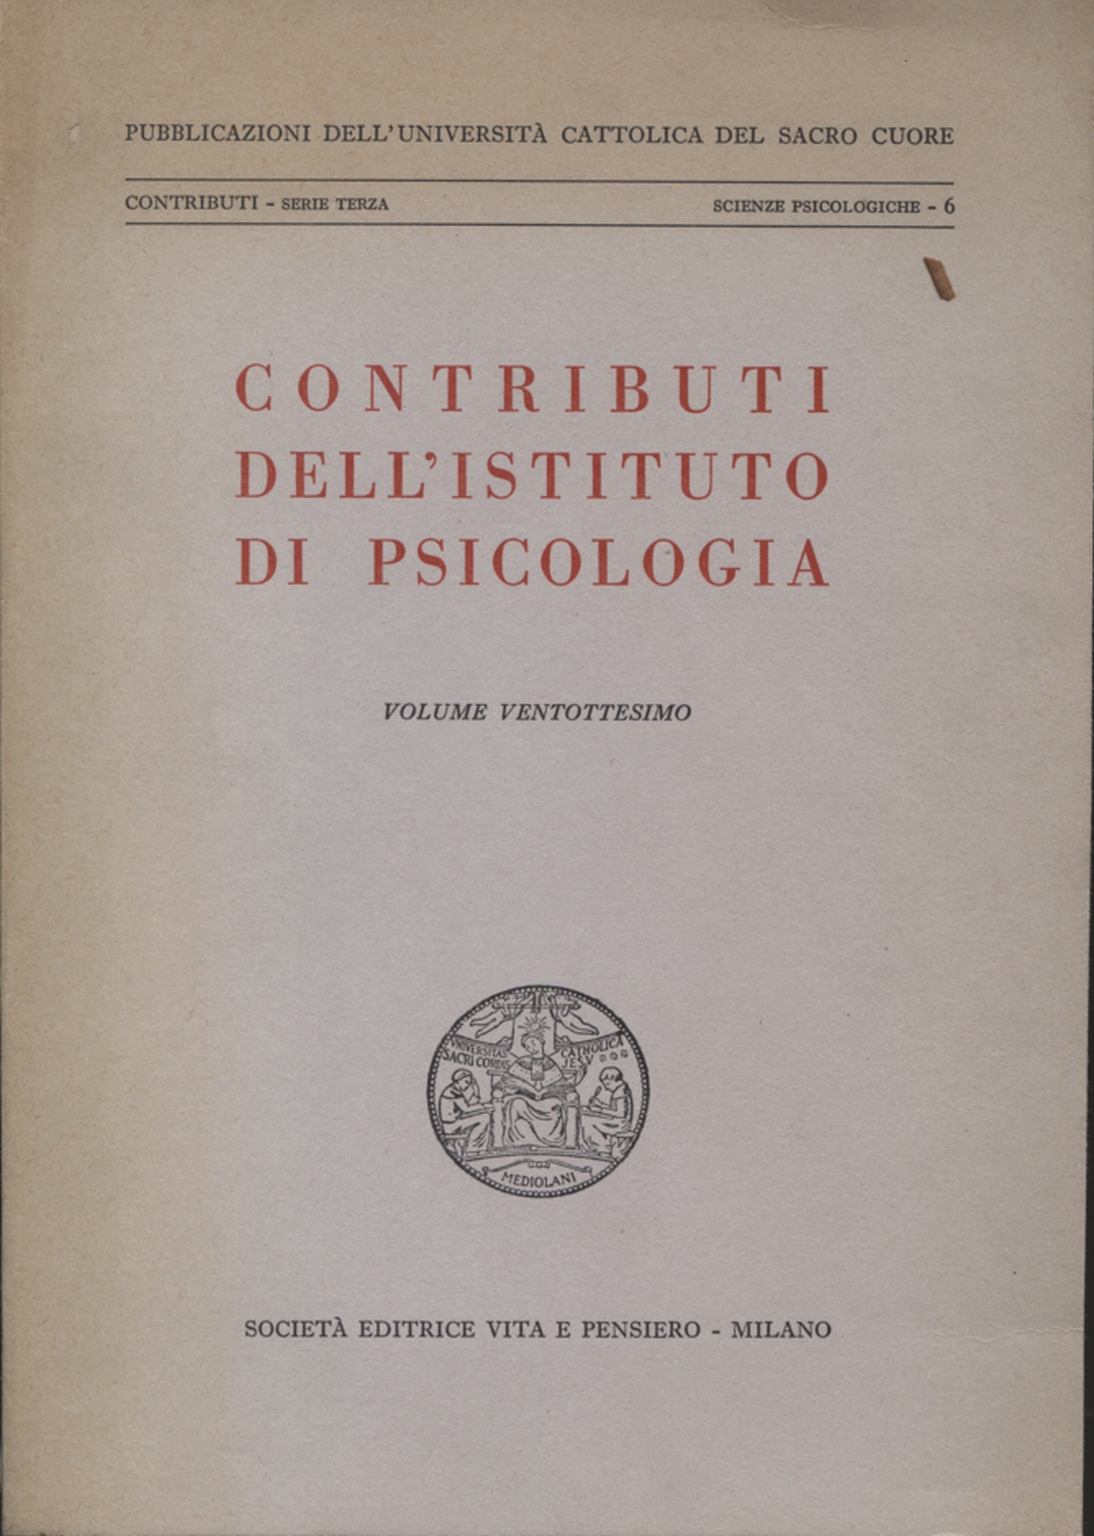 Contributions of the Institute of psychology (Volume Ve, AA.VV.